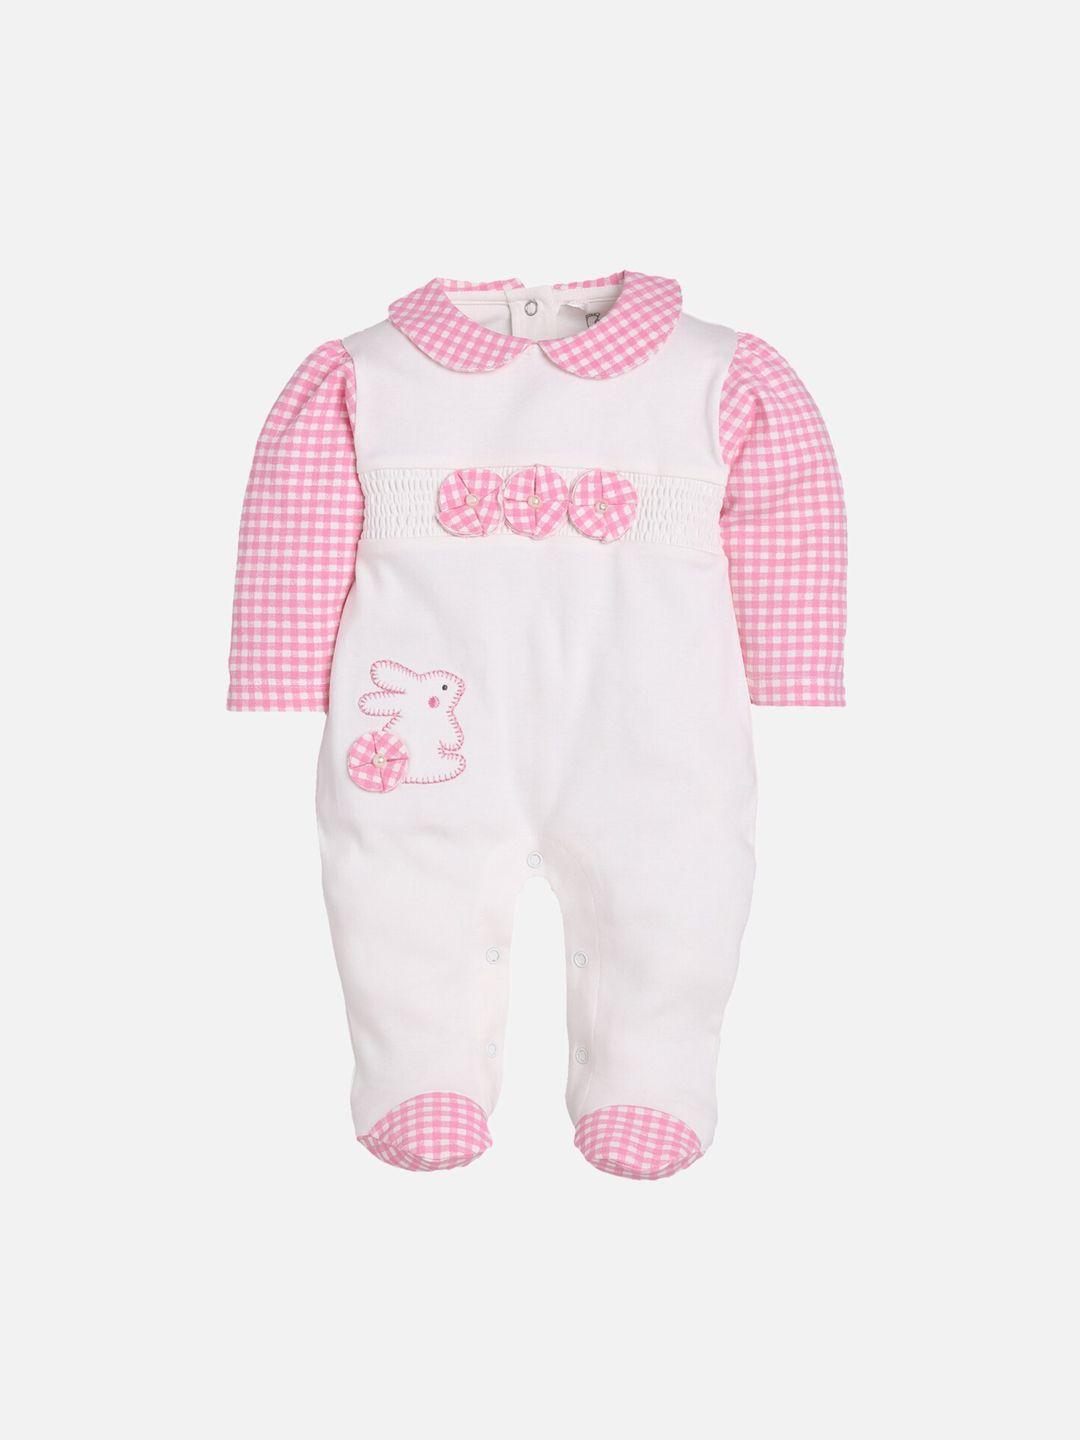 baby go infants kids white & pink solid cotton rompers with applique ornamentation